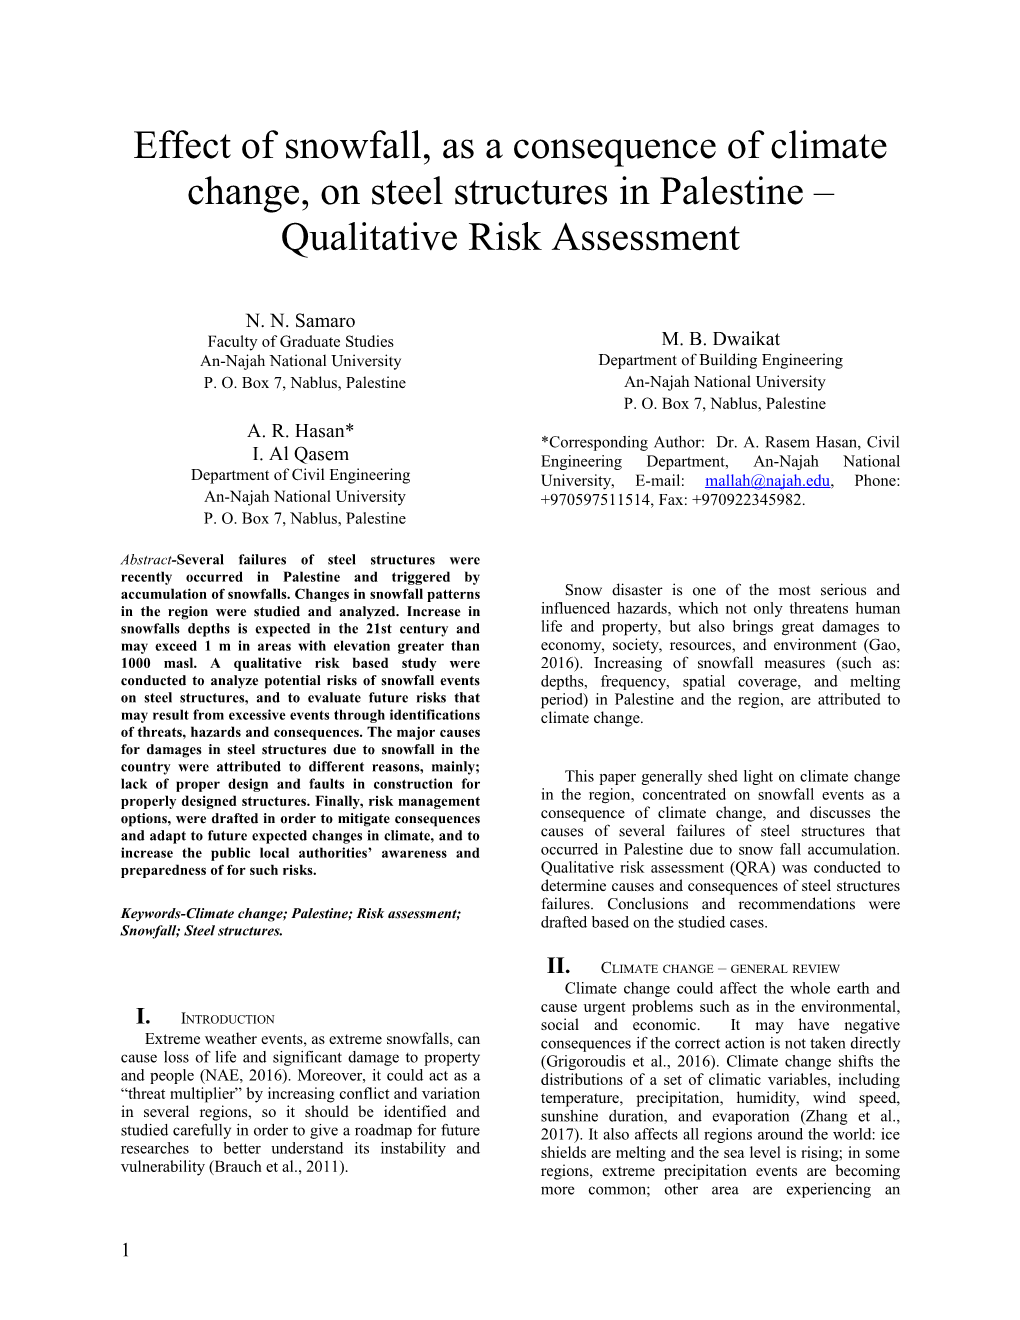 Effect of Snowfall, As a Consequence of Climate Change, on Steel Structures in Palestine